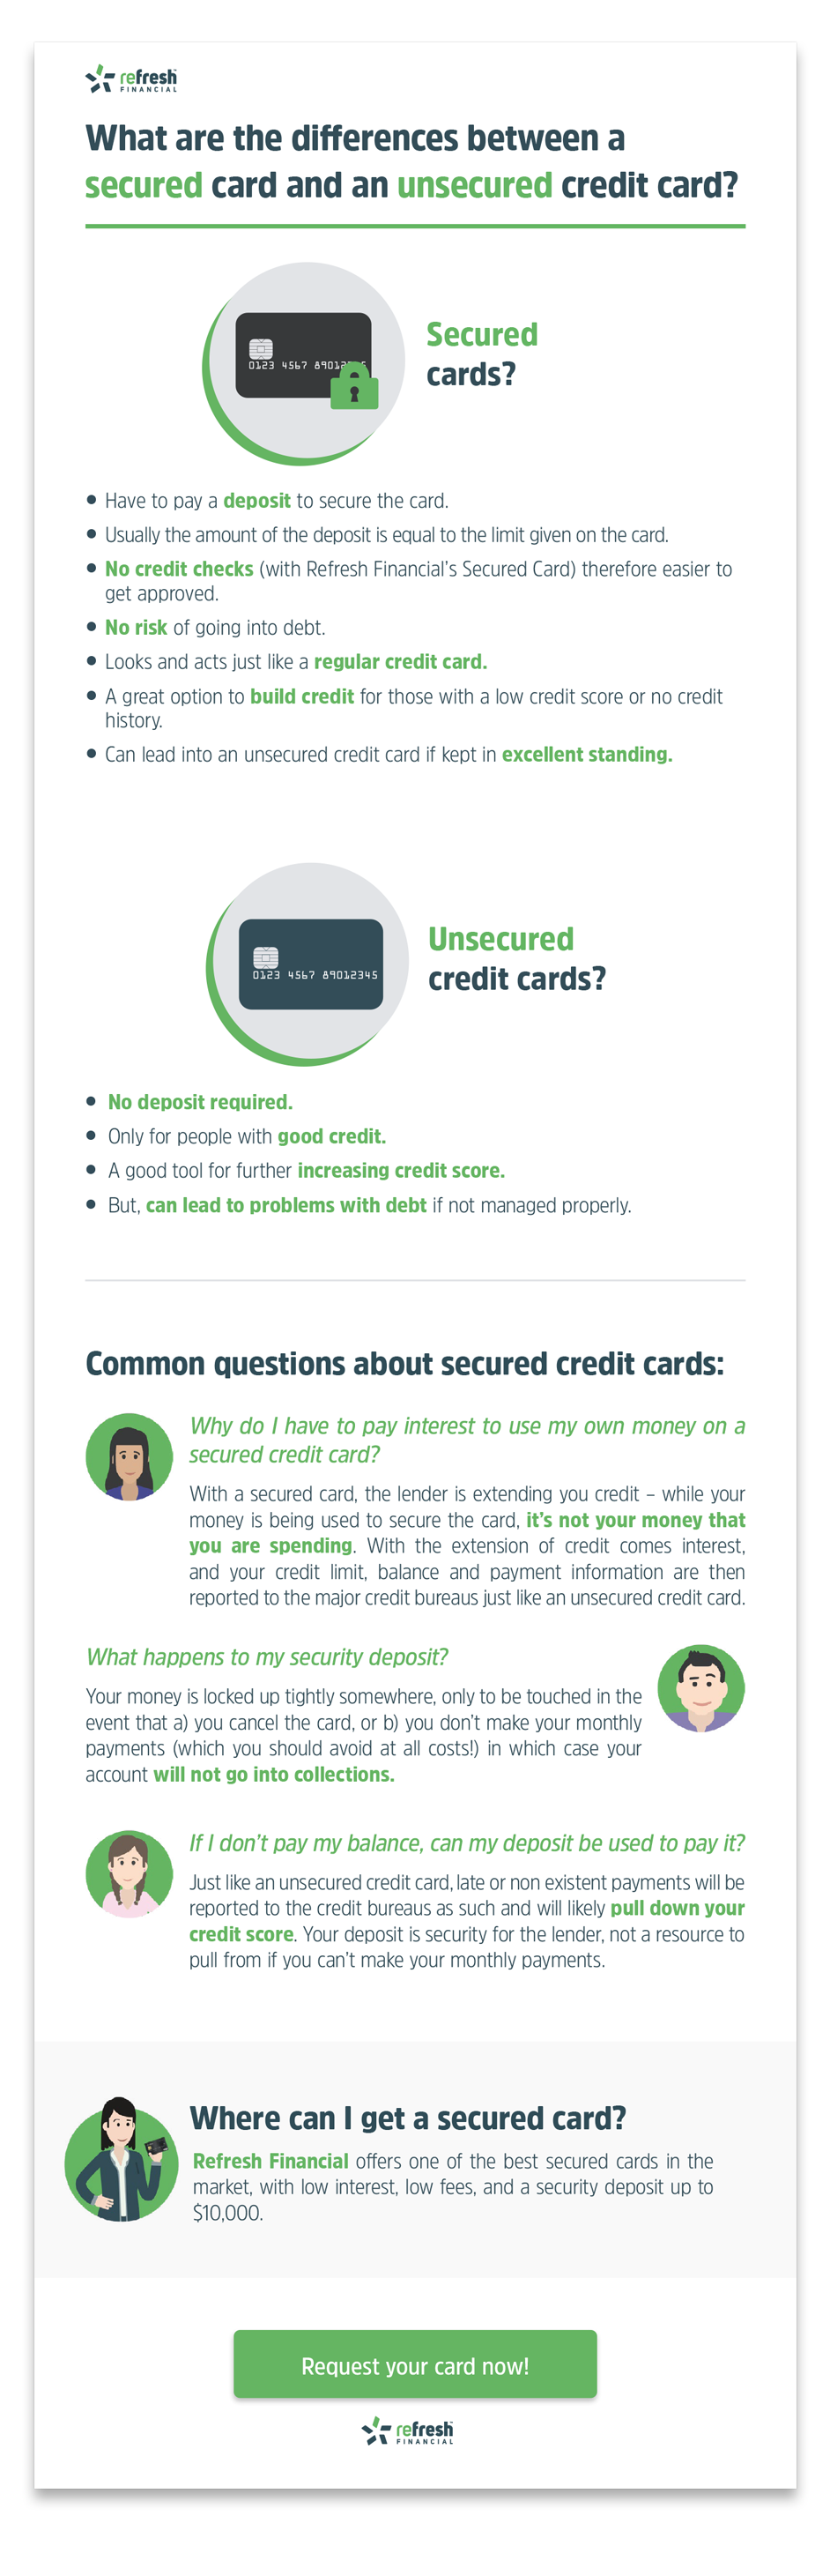 unsecured credit card